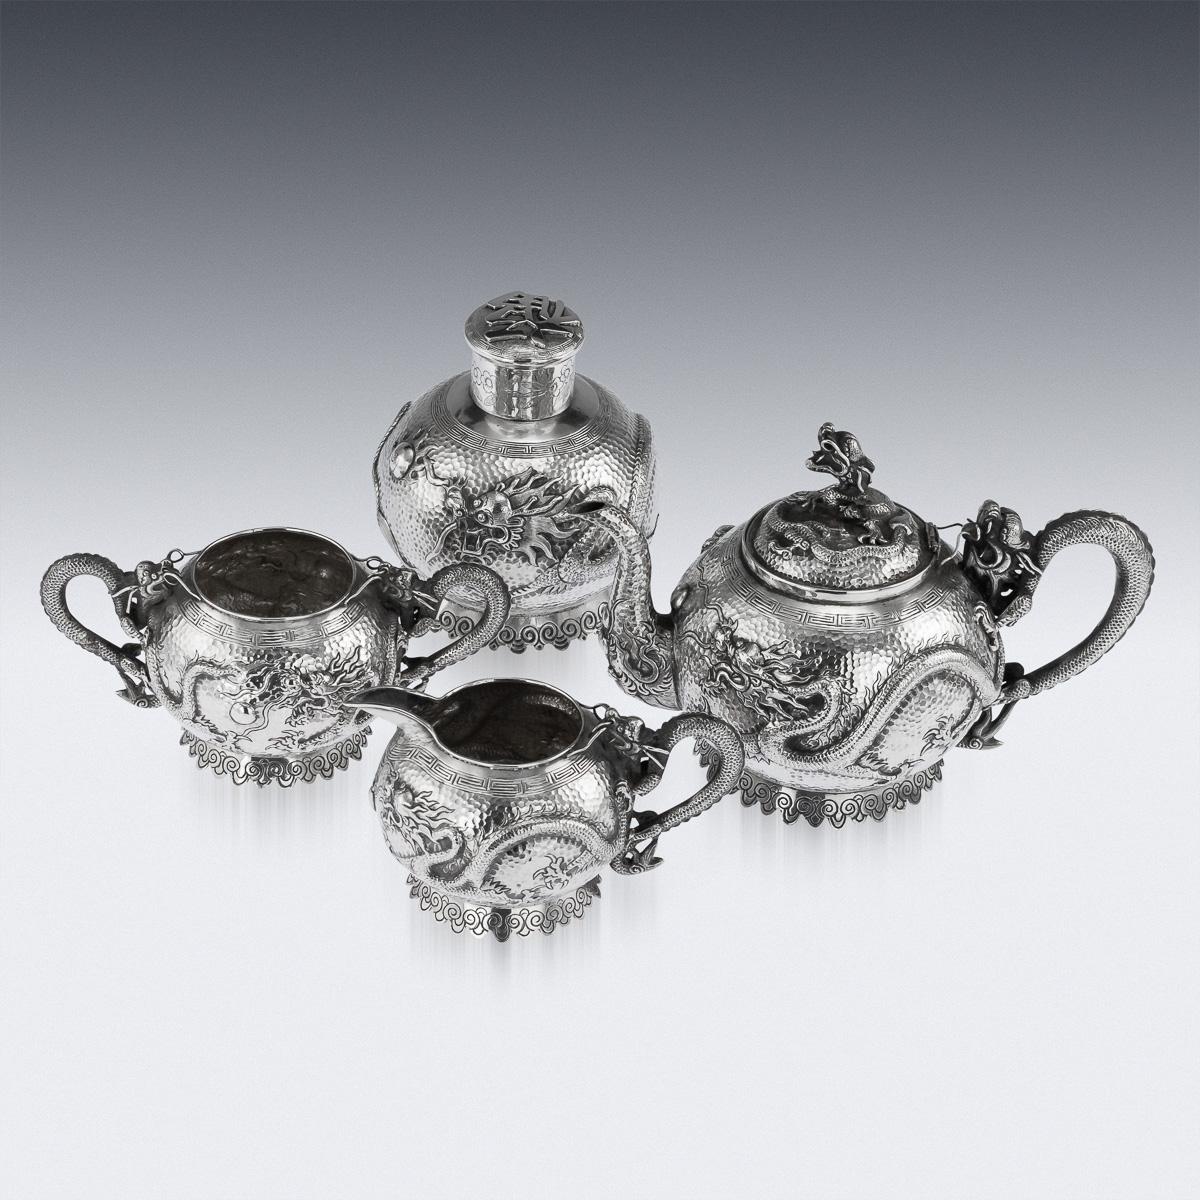 Antique 19th century Chinese Export solid silver four piece tea set, comprising of teapot, tea caddy, sugar bowl and milk jug, each spherical body is beautifully embossed with dragons chasing the flaming pearl of wisdom on hand hammered surface,